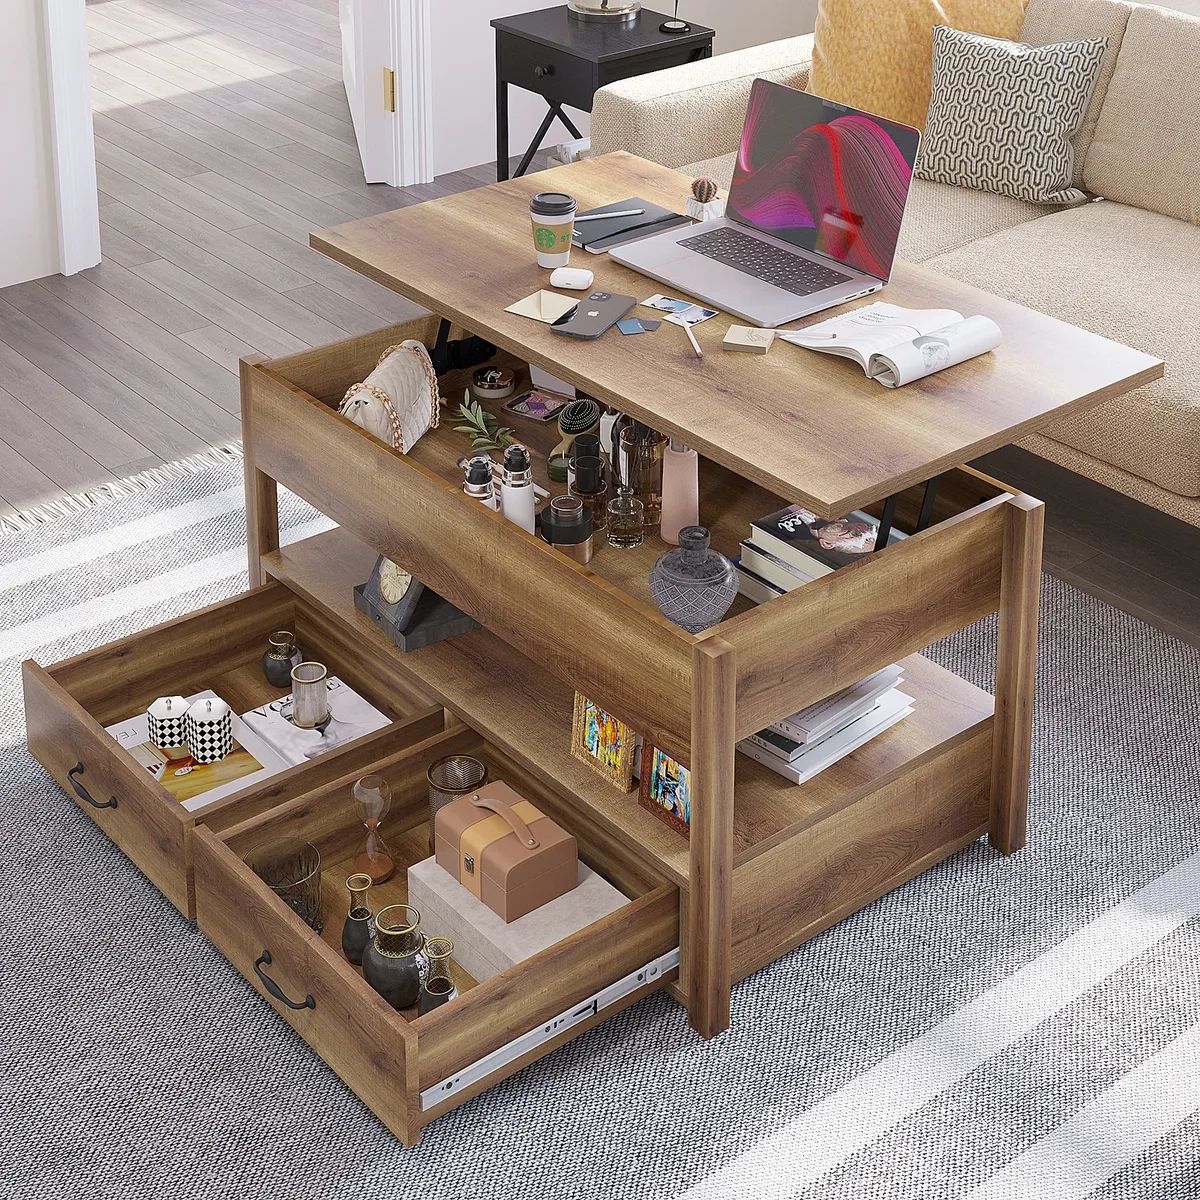 2 Drawer Lift Top Coffee Table Wooden With Hidden Compartment & Storage  Shelves | Ebay Inside Coffee Tables With Hidden Compartments (Photo 1 of 15)